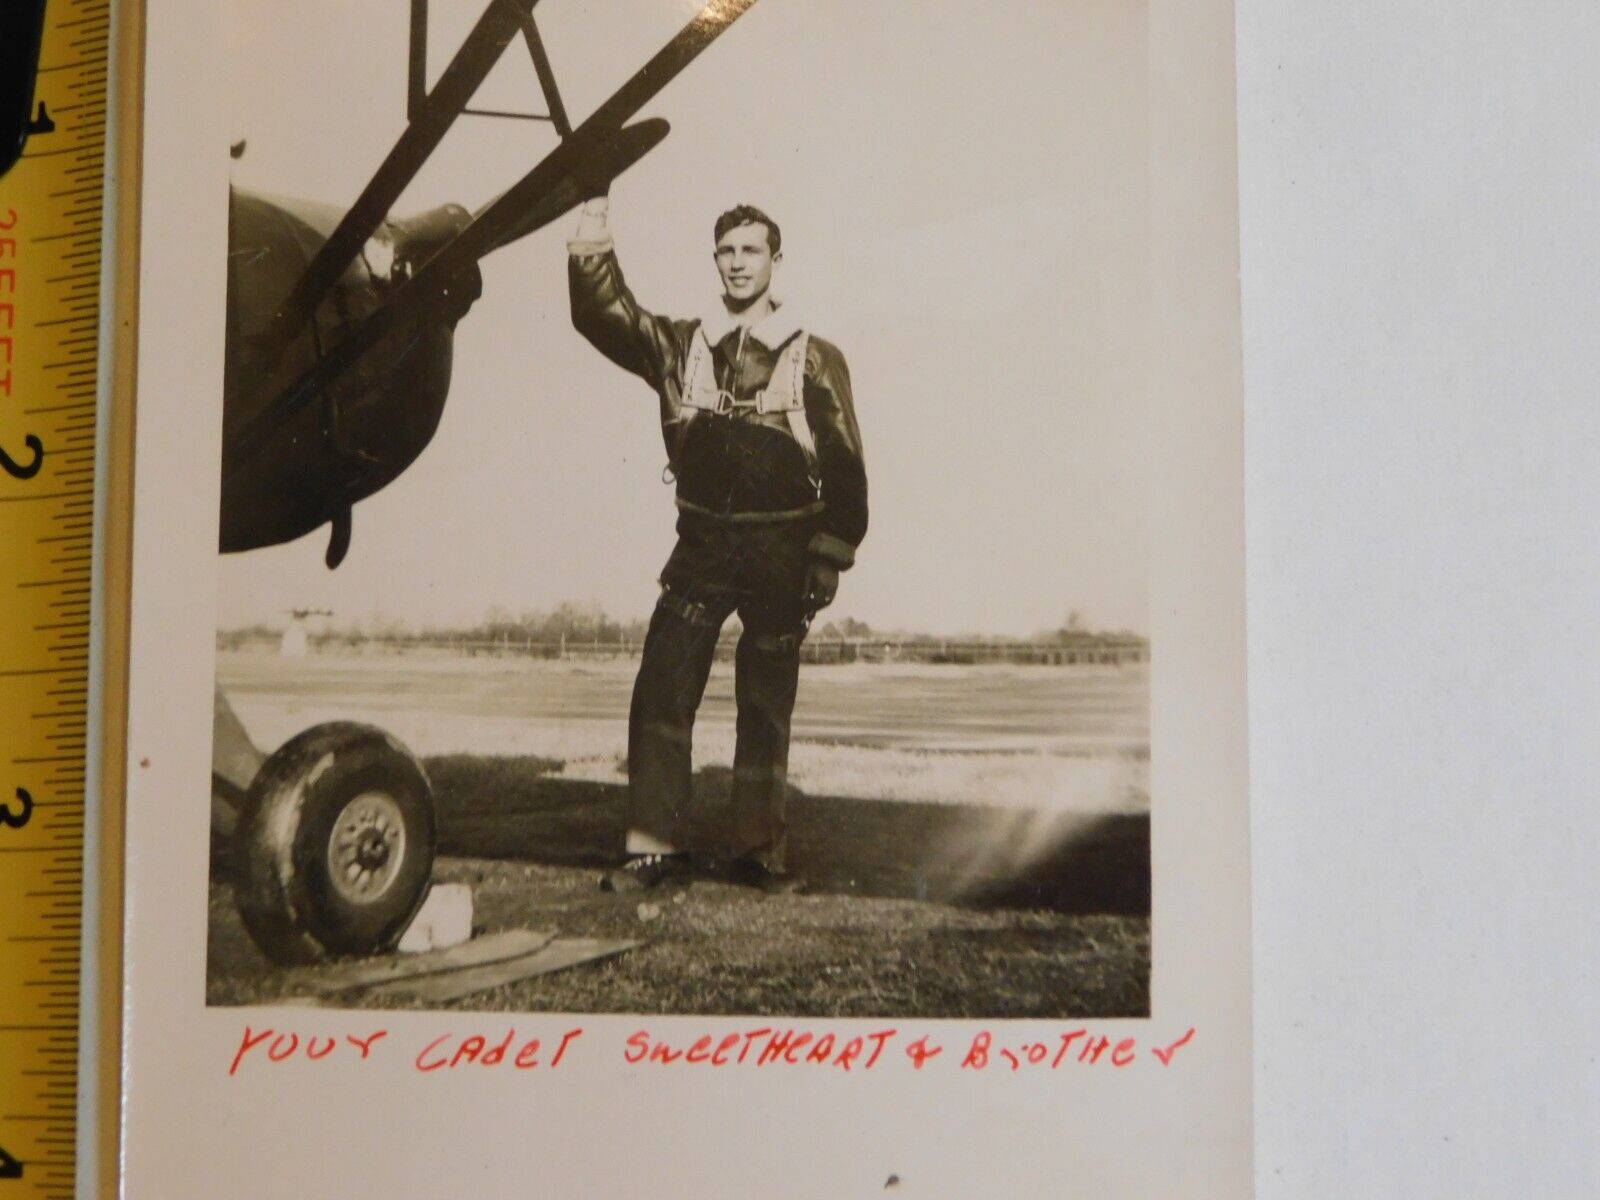 VTG PHOTO SOLDIER CADET STANDING BY AIRPLANE WITH PARACHUTE ON WW2 WWII 1943